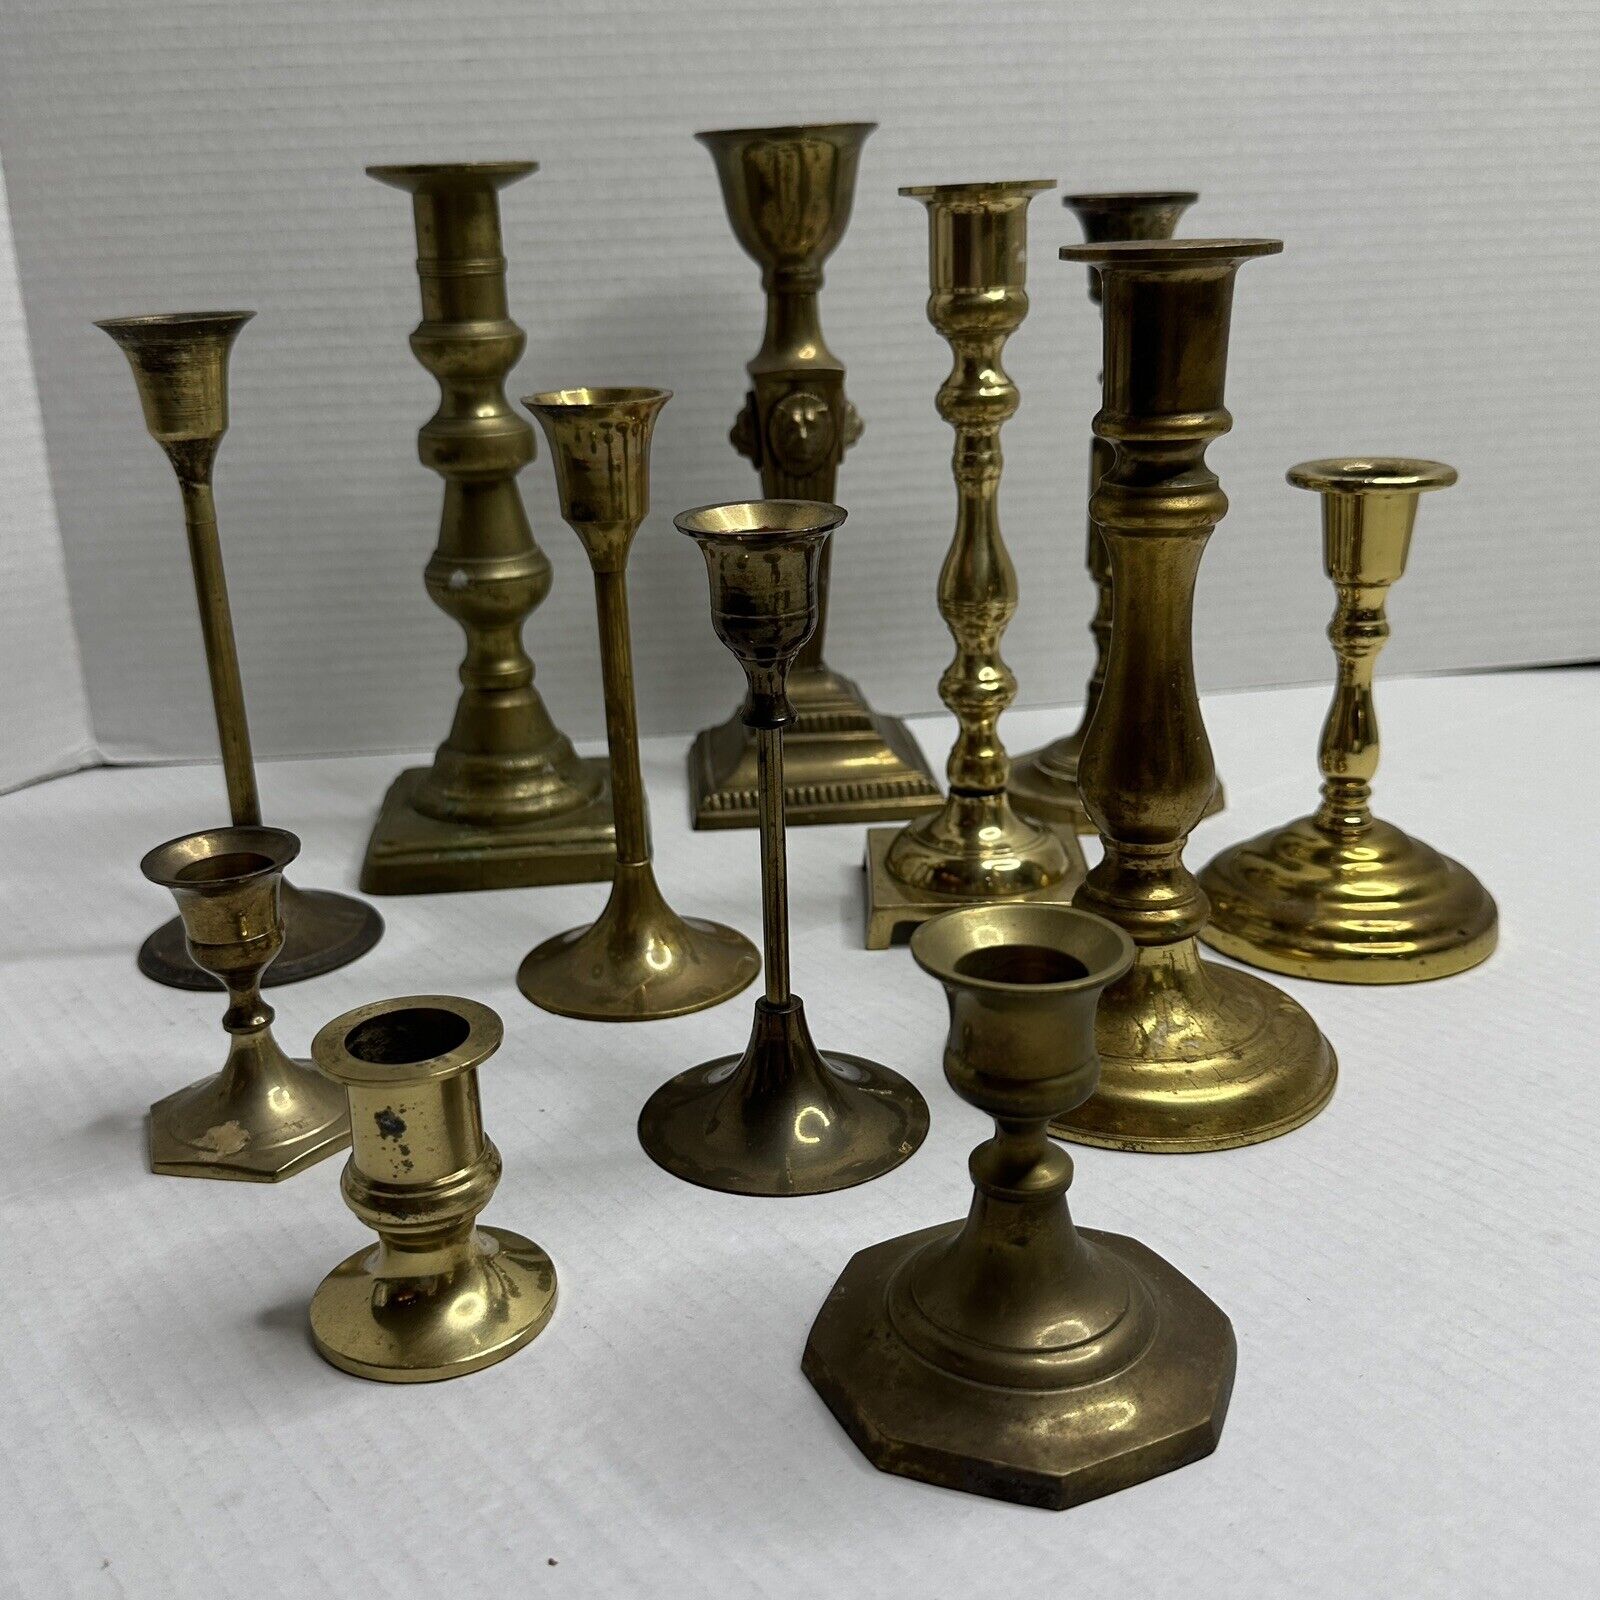 Mixed Lot of 13 Vintage Brass Candlesticks Holders Wedding Tablescape Set